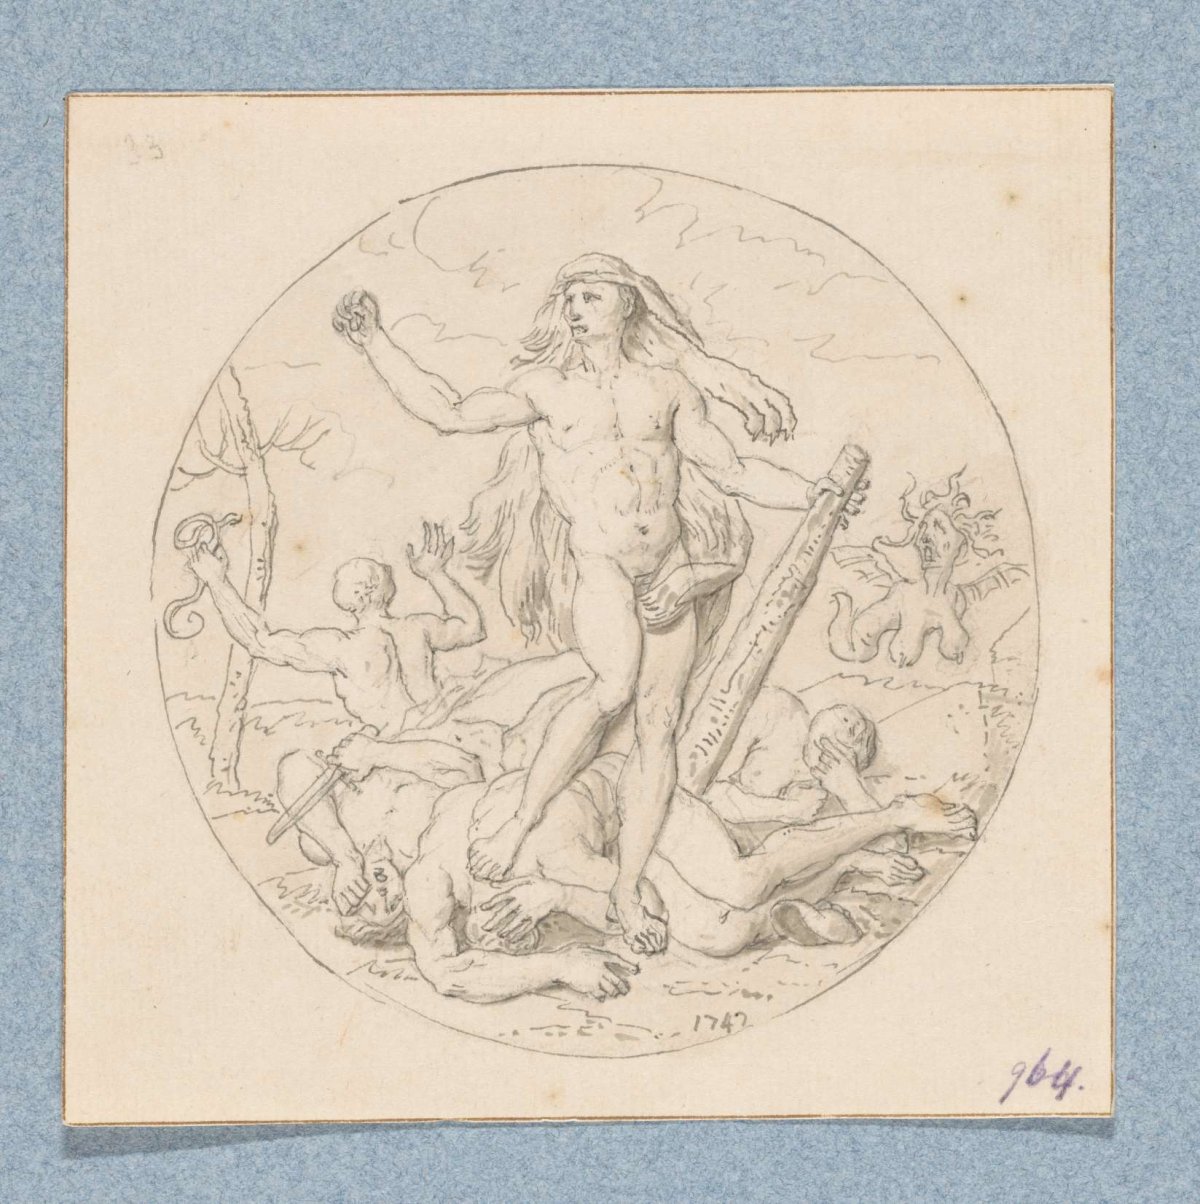 Hercules as victor (in box with 43 drawings), Louis Fabritius Dubourg, 1747